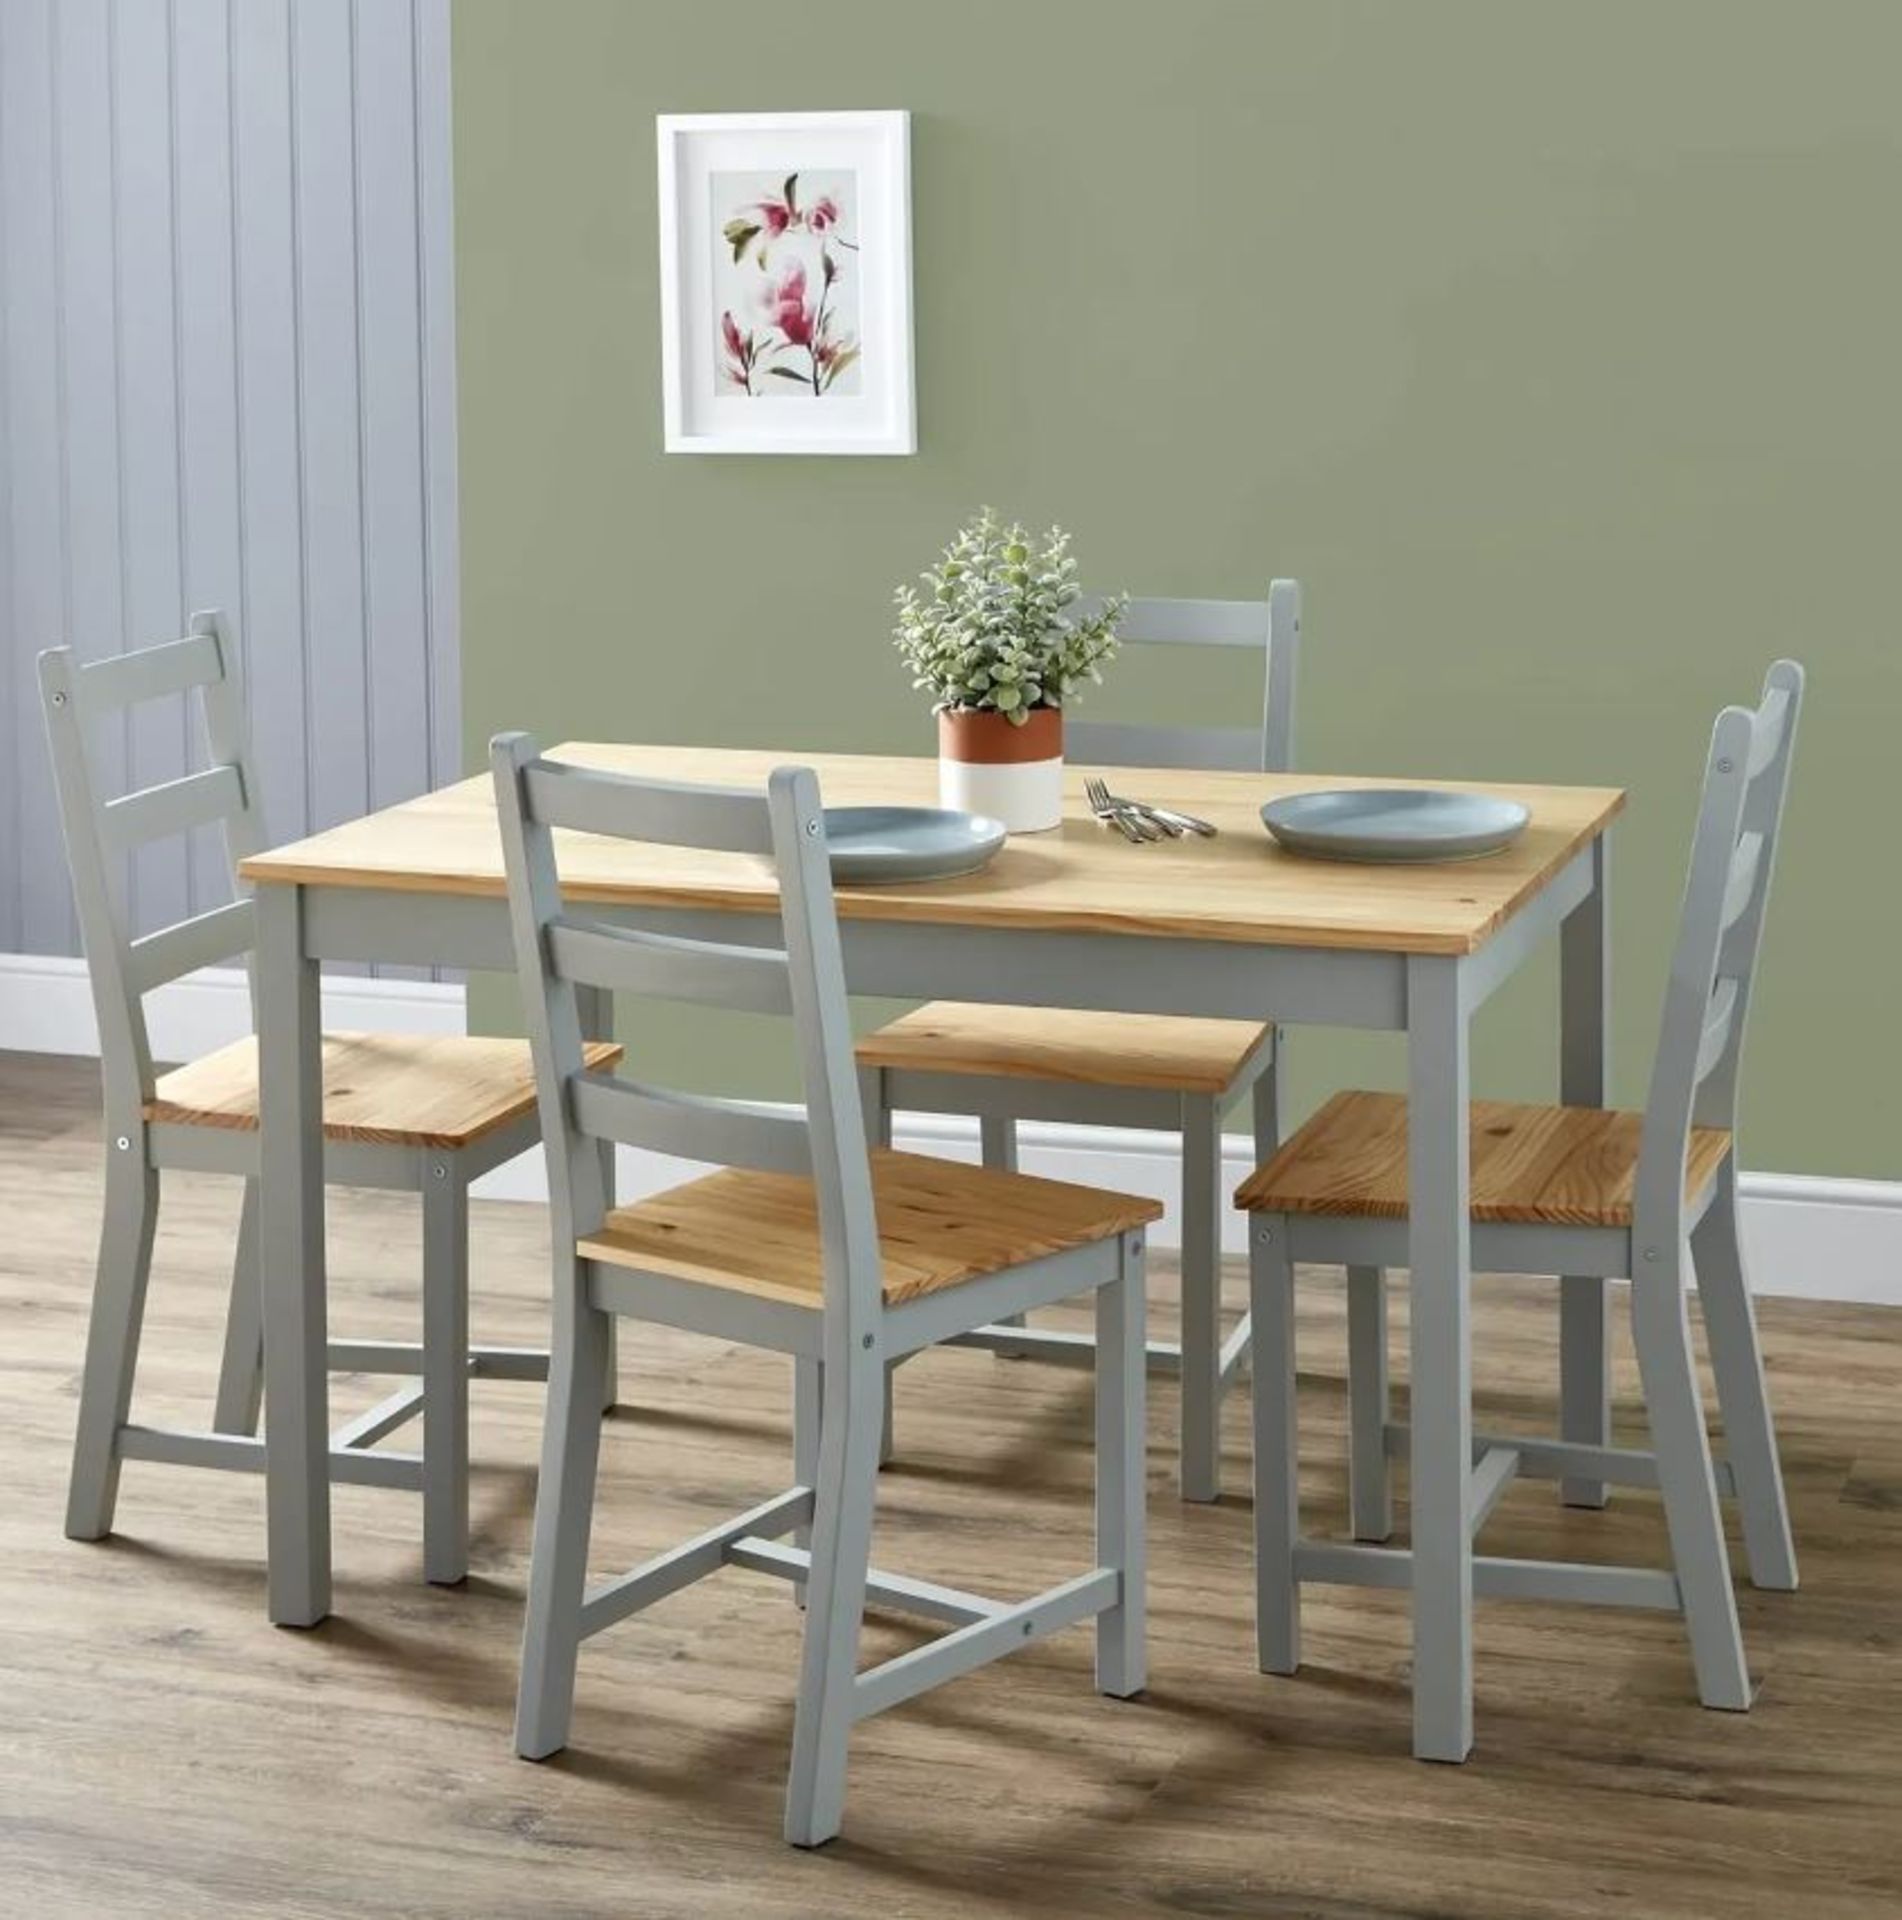 (R3O) 1x Mortimer Pine Dining Set With 4 Chairs. RRP £200.00. Unit Appears Clean, Unused. Contents